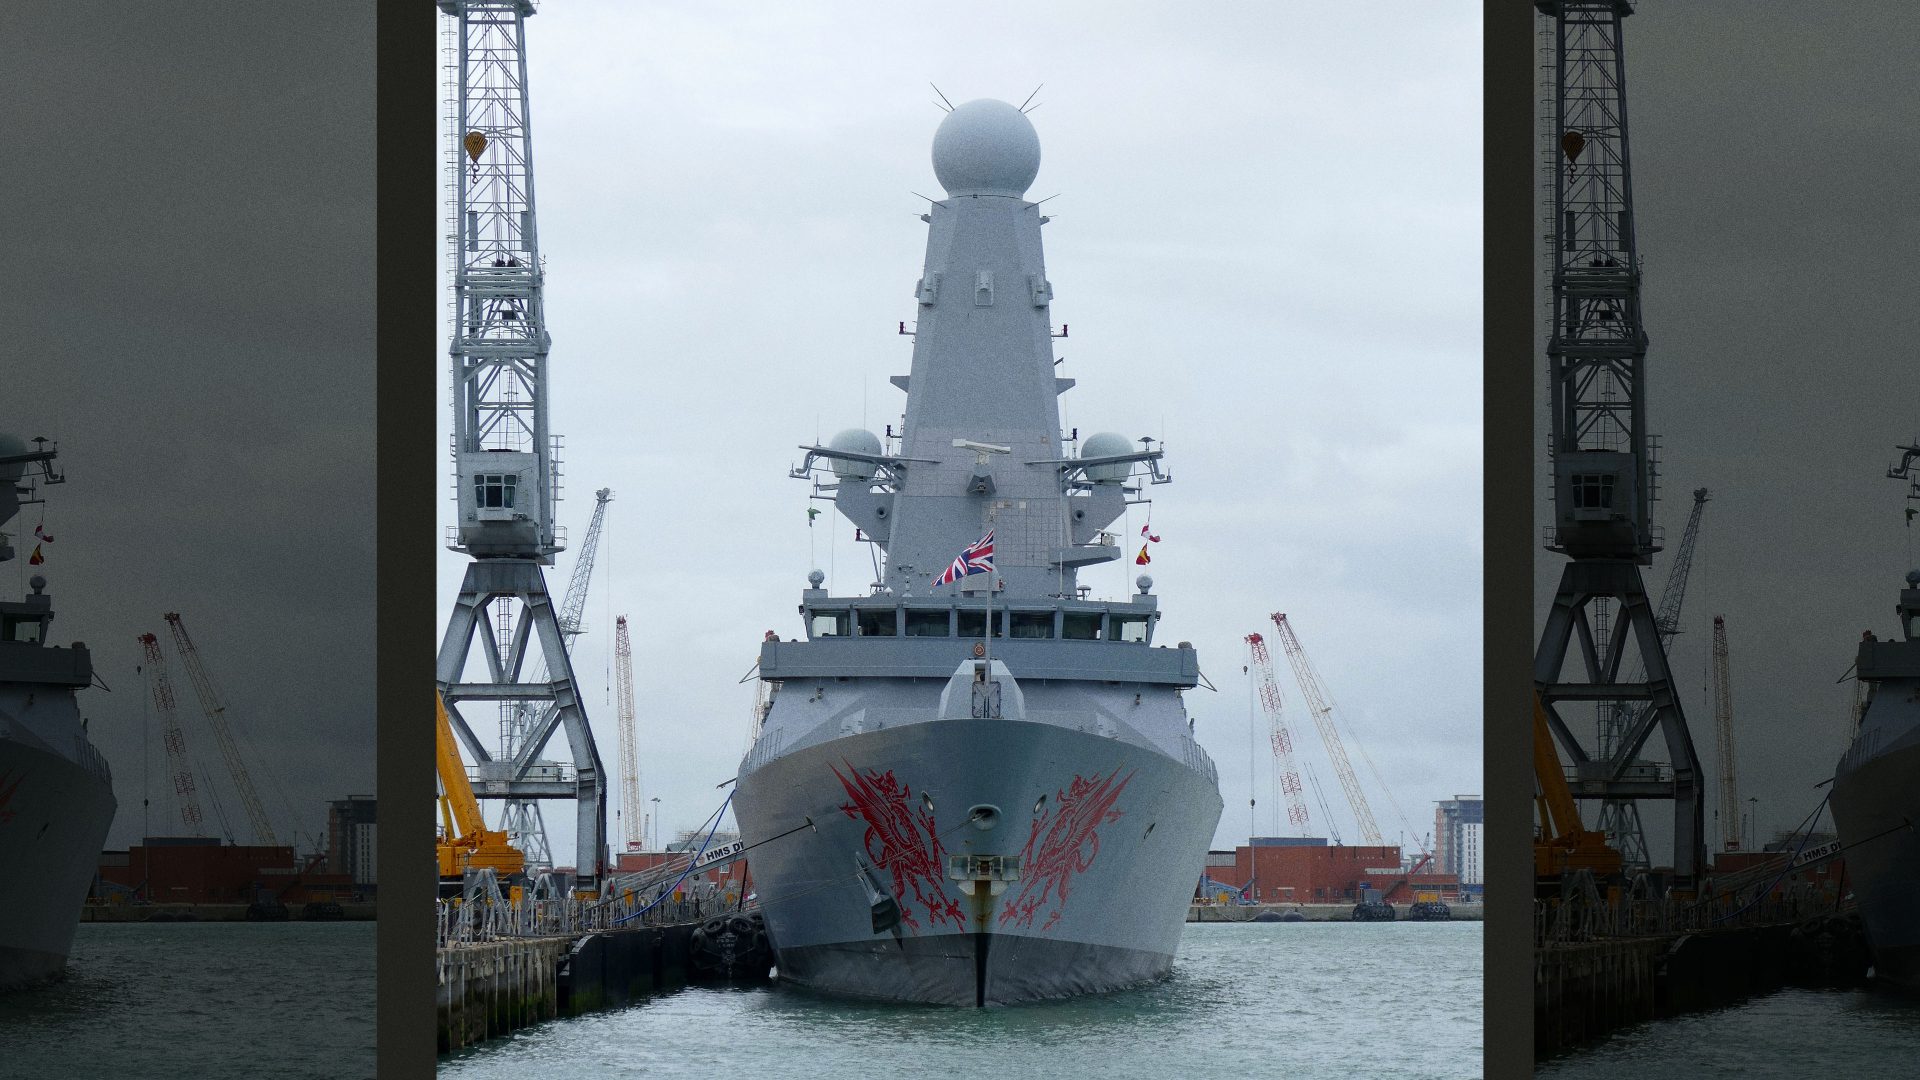 HMS St Albans, one of the Royal Navy’s Type 23 frigates, which has recently returned to sea following a refit that took four years to complete. Photo: Universal History Archive/Universal Images Group/Getty